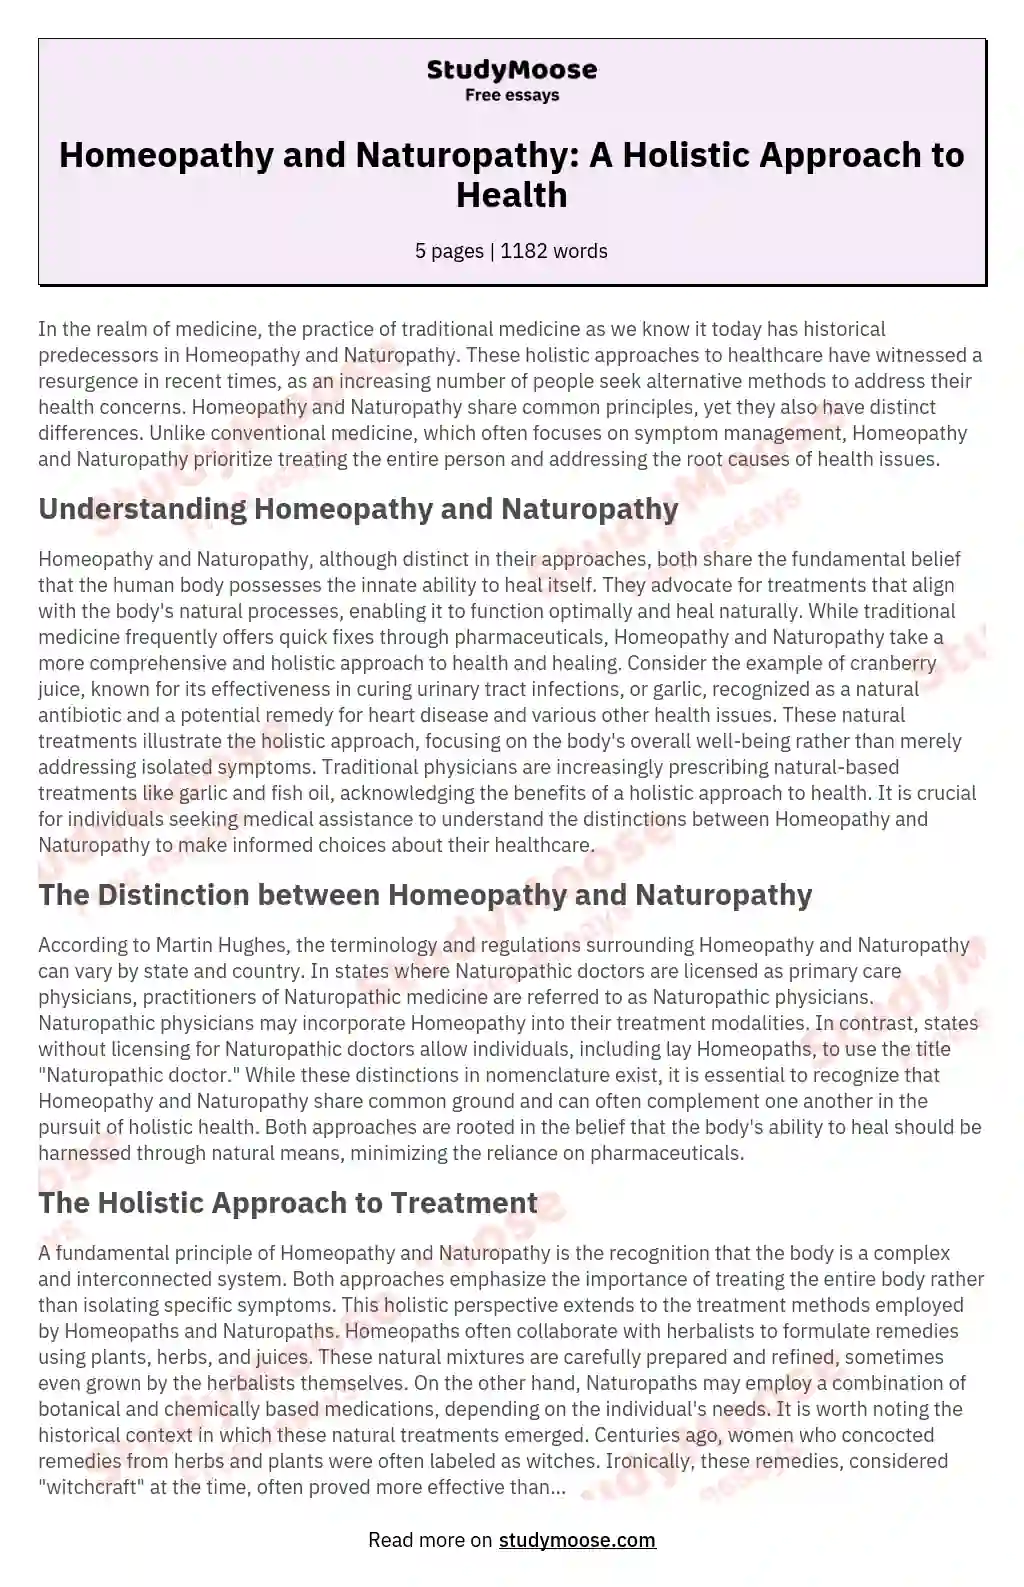 Homeopathy and Naturopathy: A Holistic Approach to Health essay